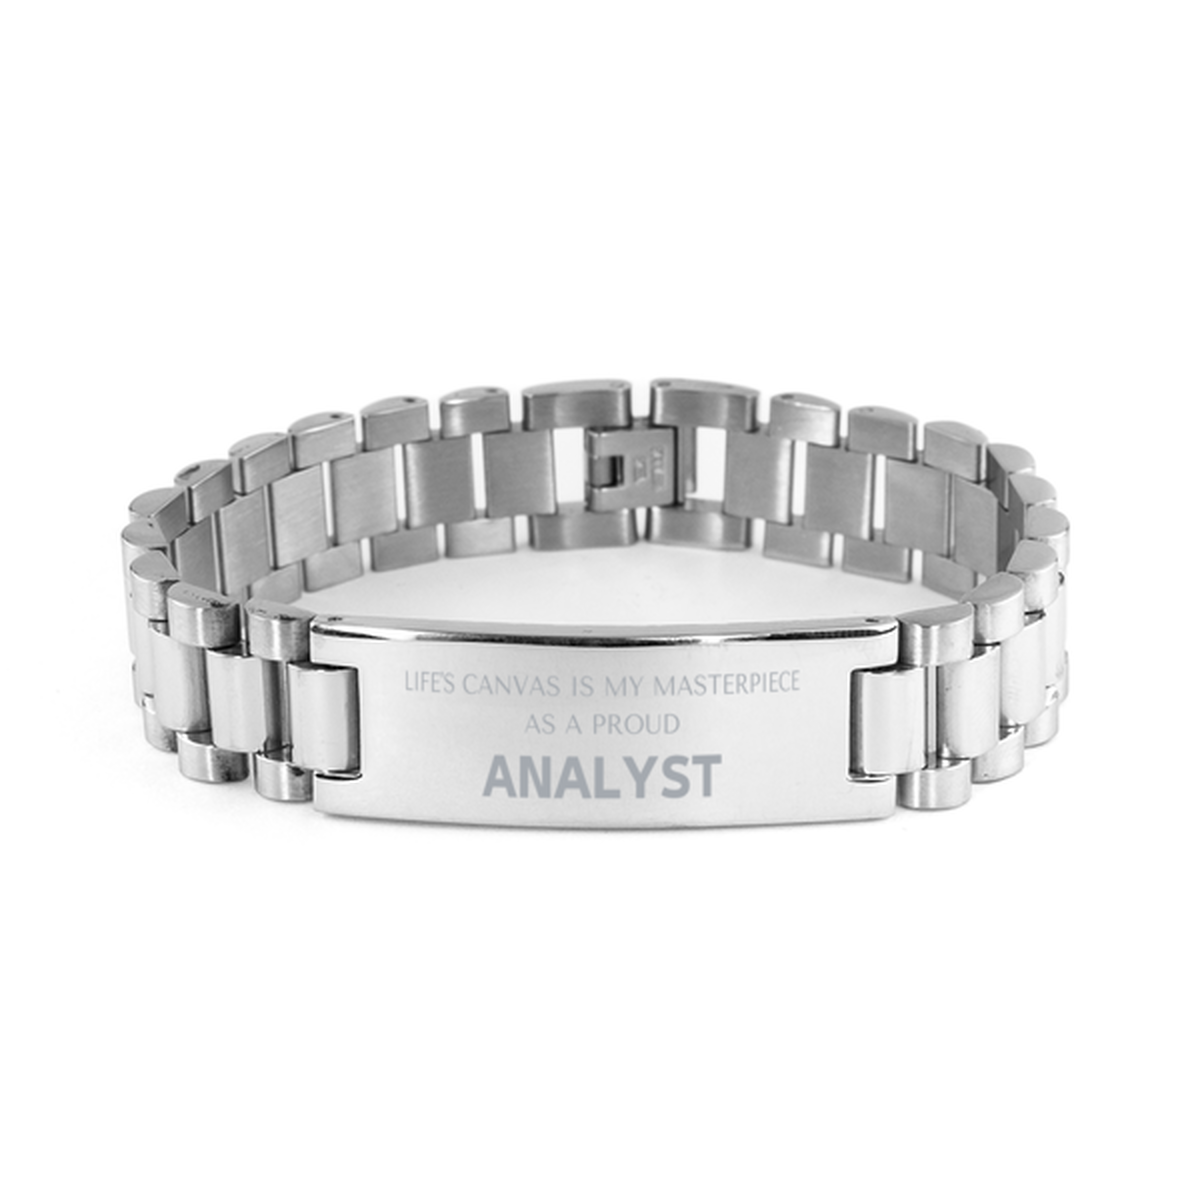 Proud Analyst Gifts, Life's canvas is my masterpiece, Epic Birthday Christmas Unique Ladder Stainless Steel Bracelet For Analyst, Coworkers, Men, Women, Friends